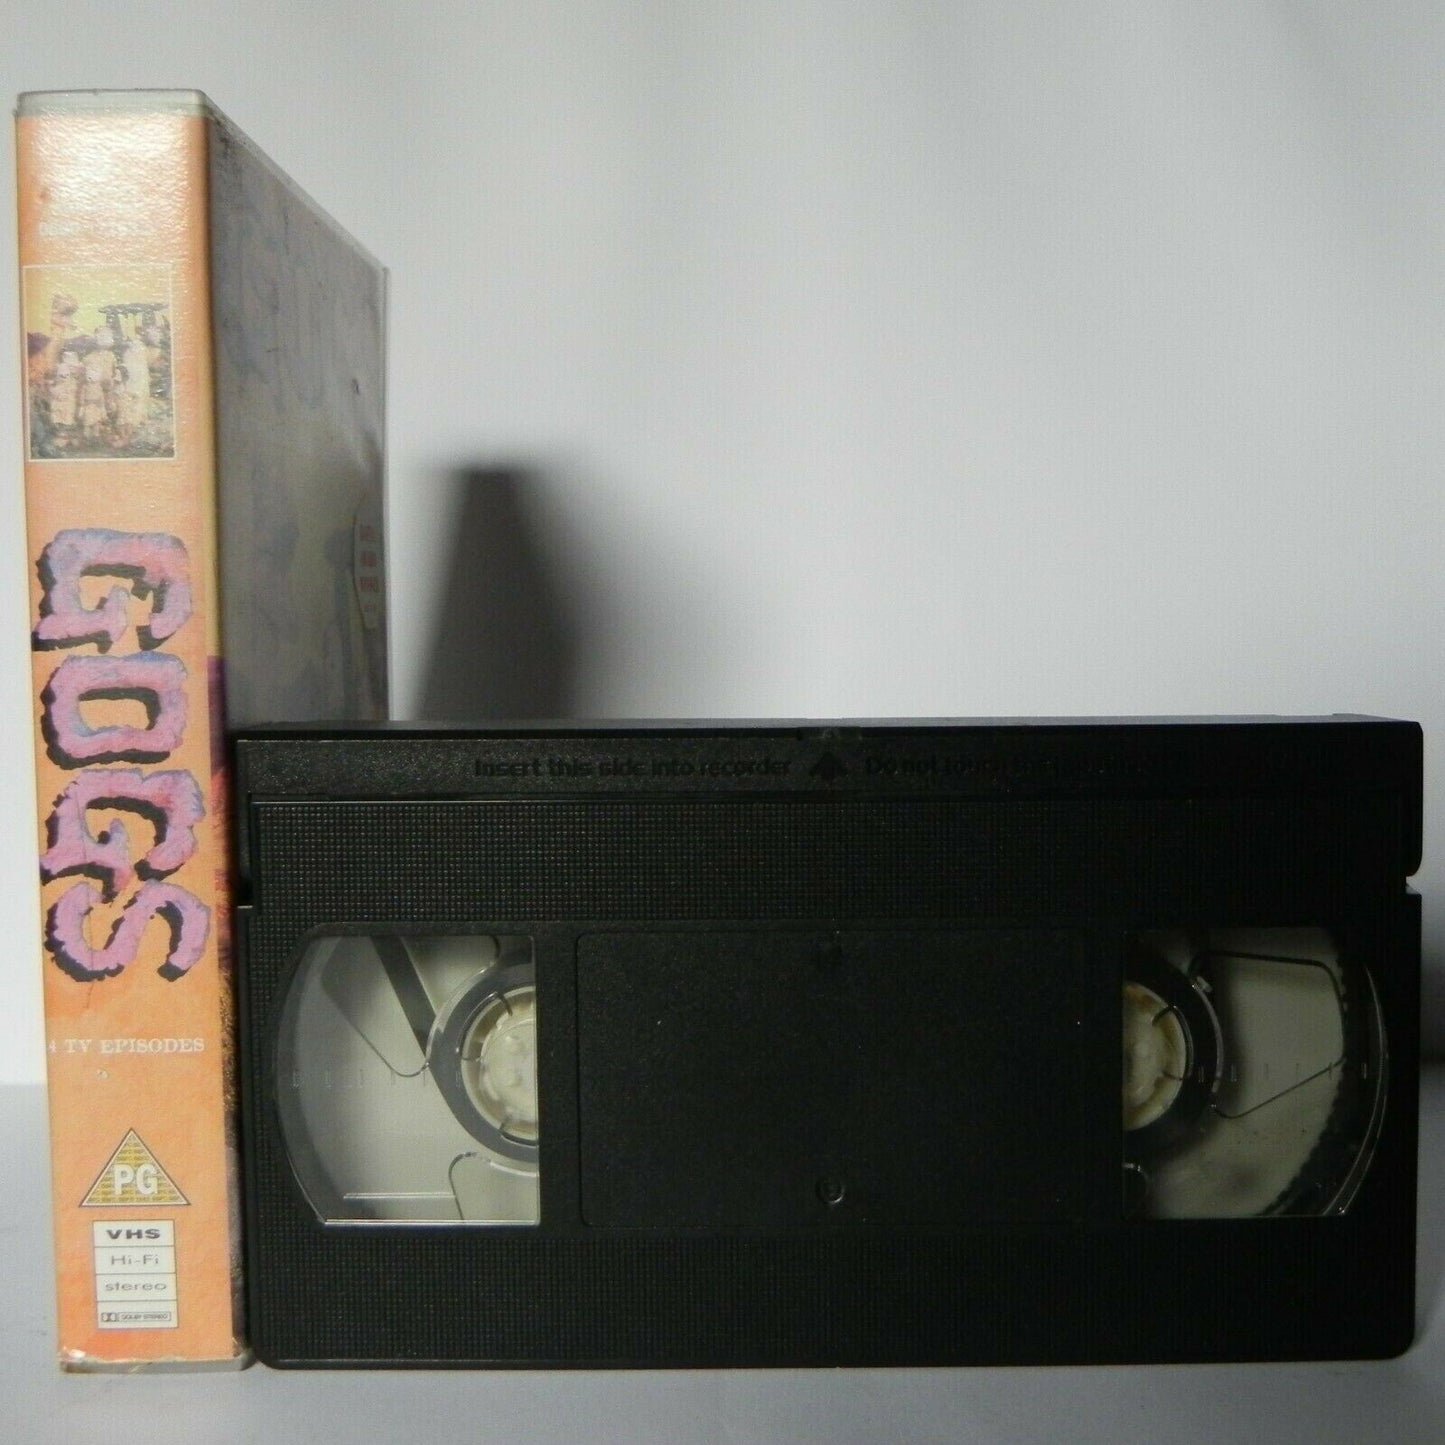 Gogs - Warner - Animated - Classic Series - 4 TV Episodes - Children's - Pal VHS-